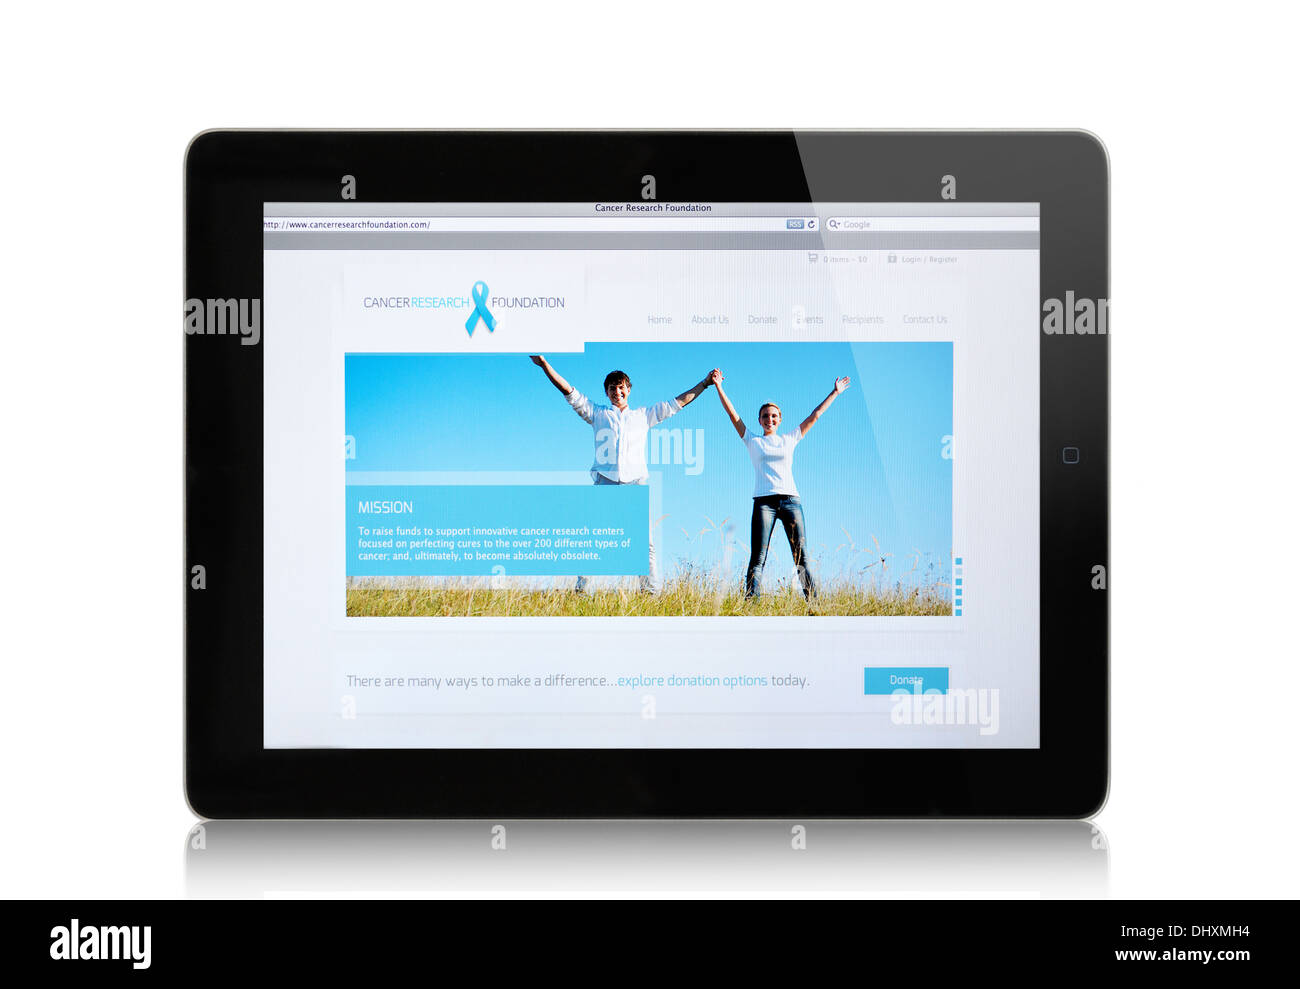 Cancer Research Foundation website on iPad screen Stock Photo